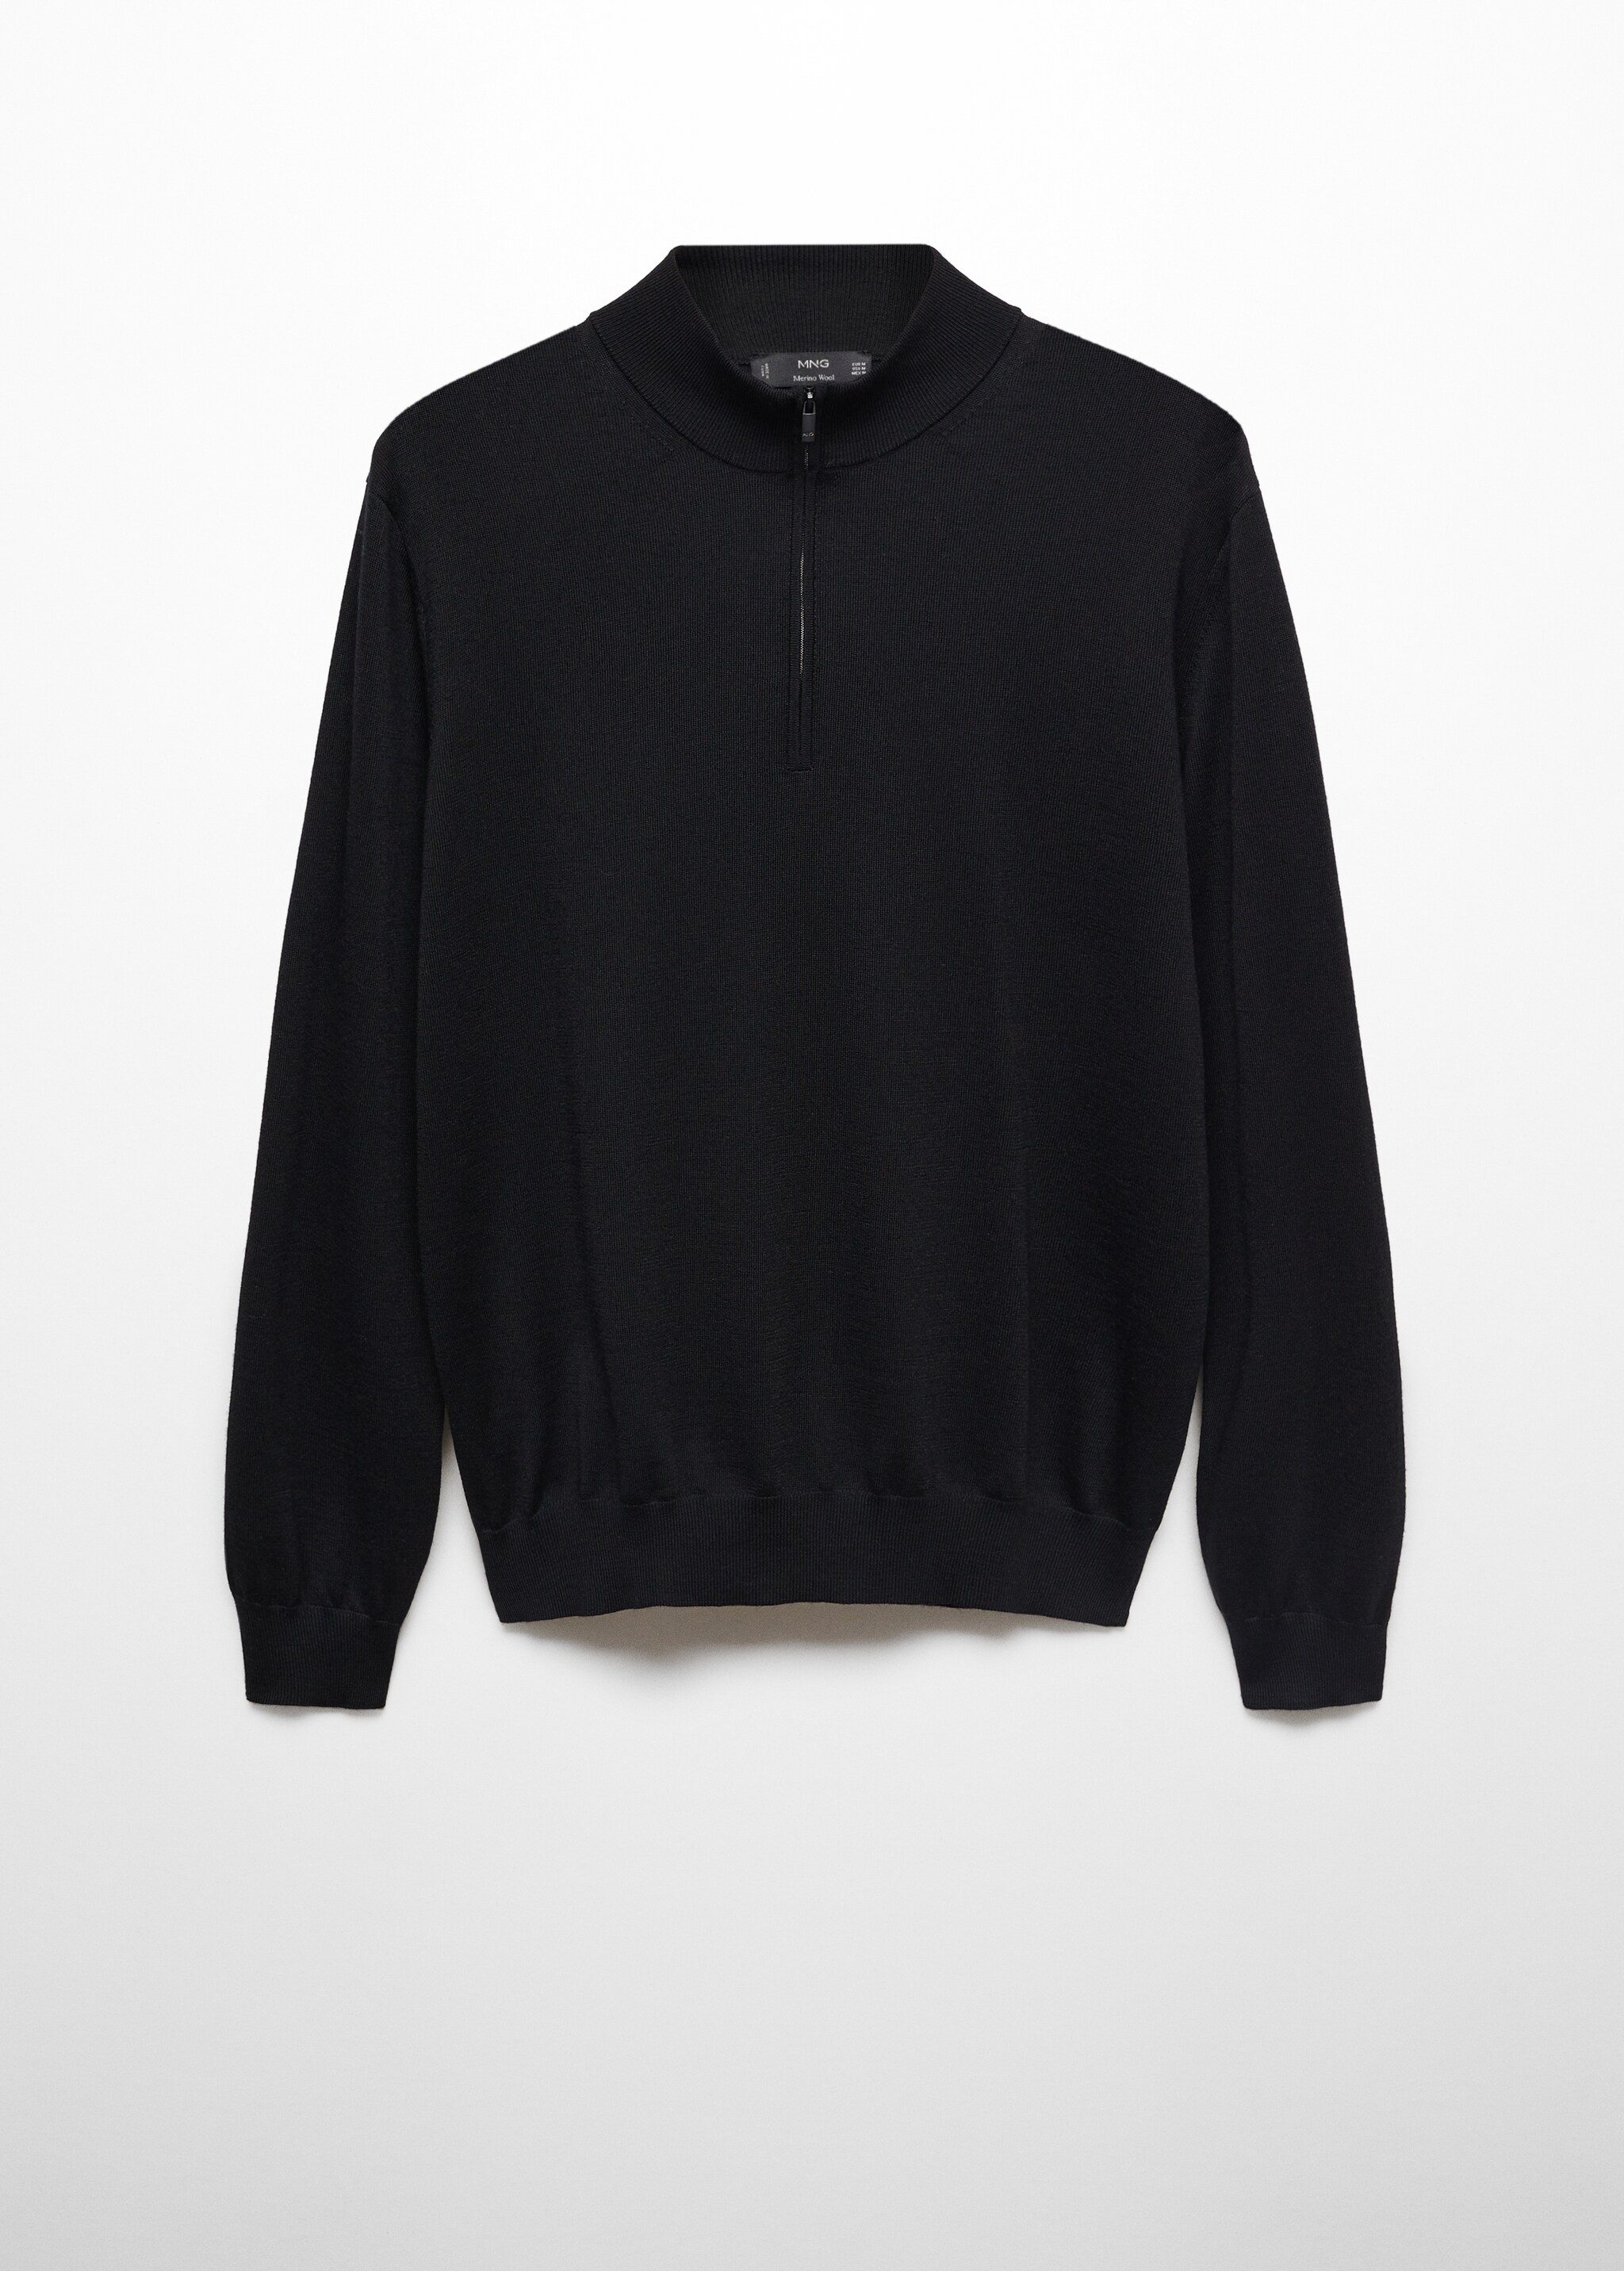 100% merino wool sweater with zip collar - Article without model